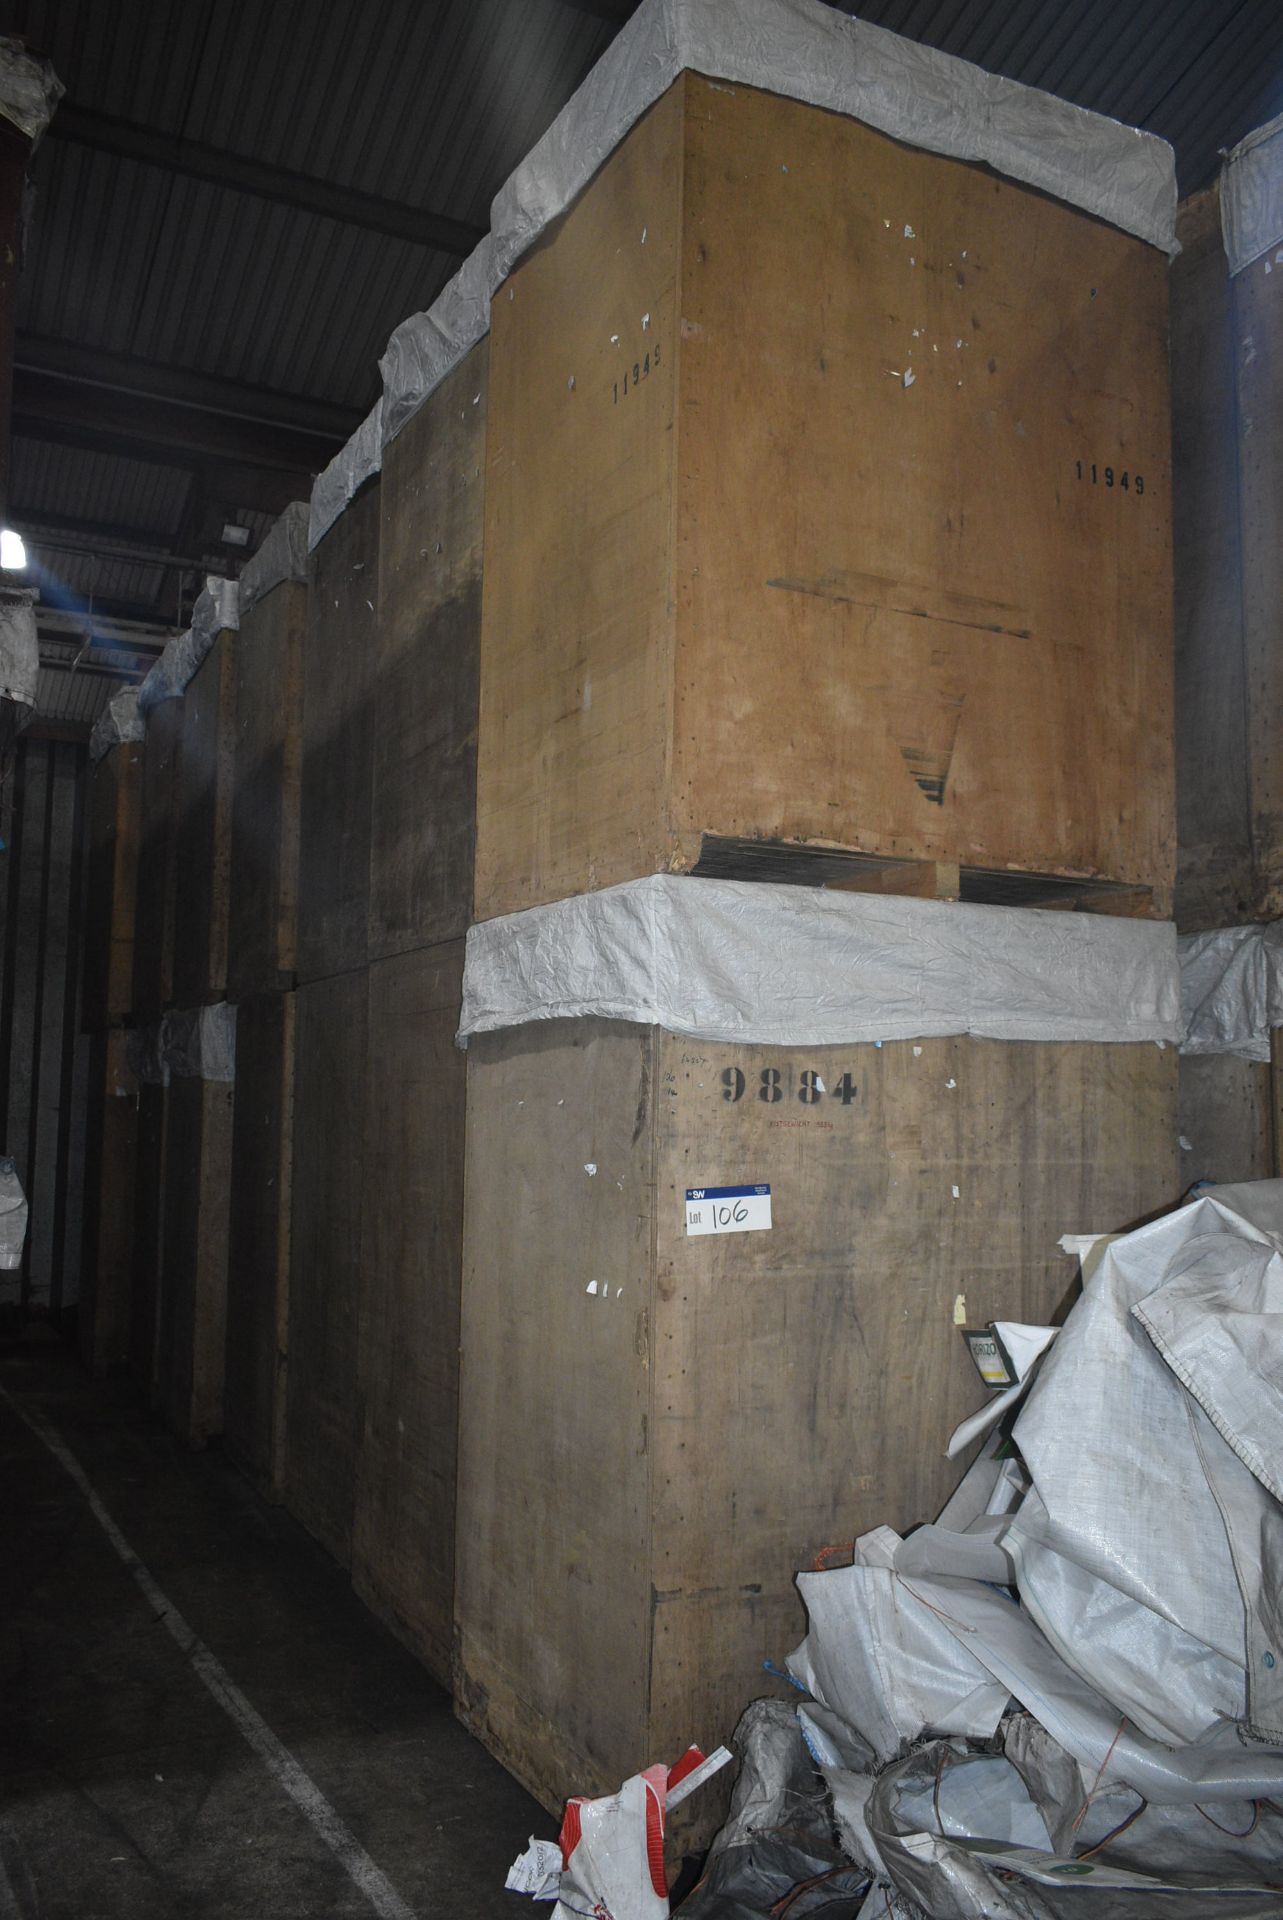 14 Timber Tote / Product Holding Boxes, each approx. 1.52m x 1.15m x 2.07m deep overall, with covers